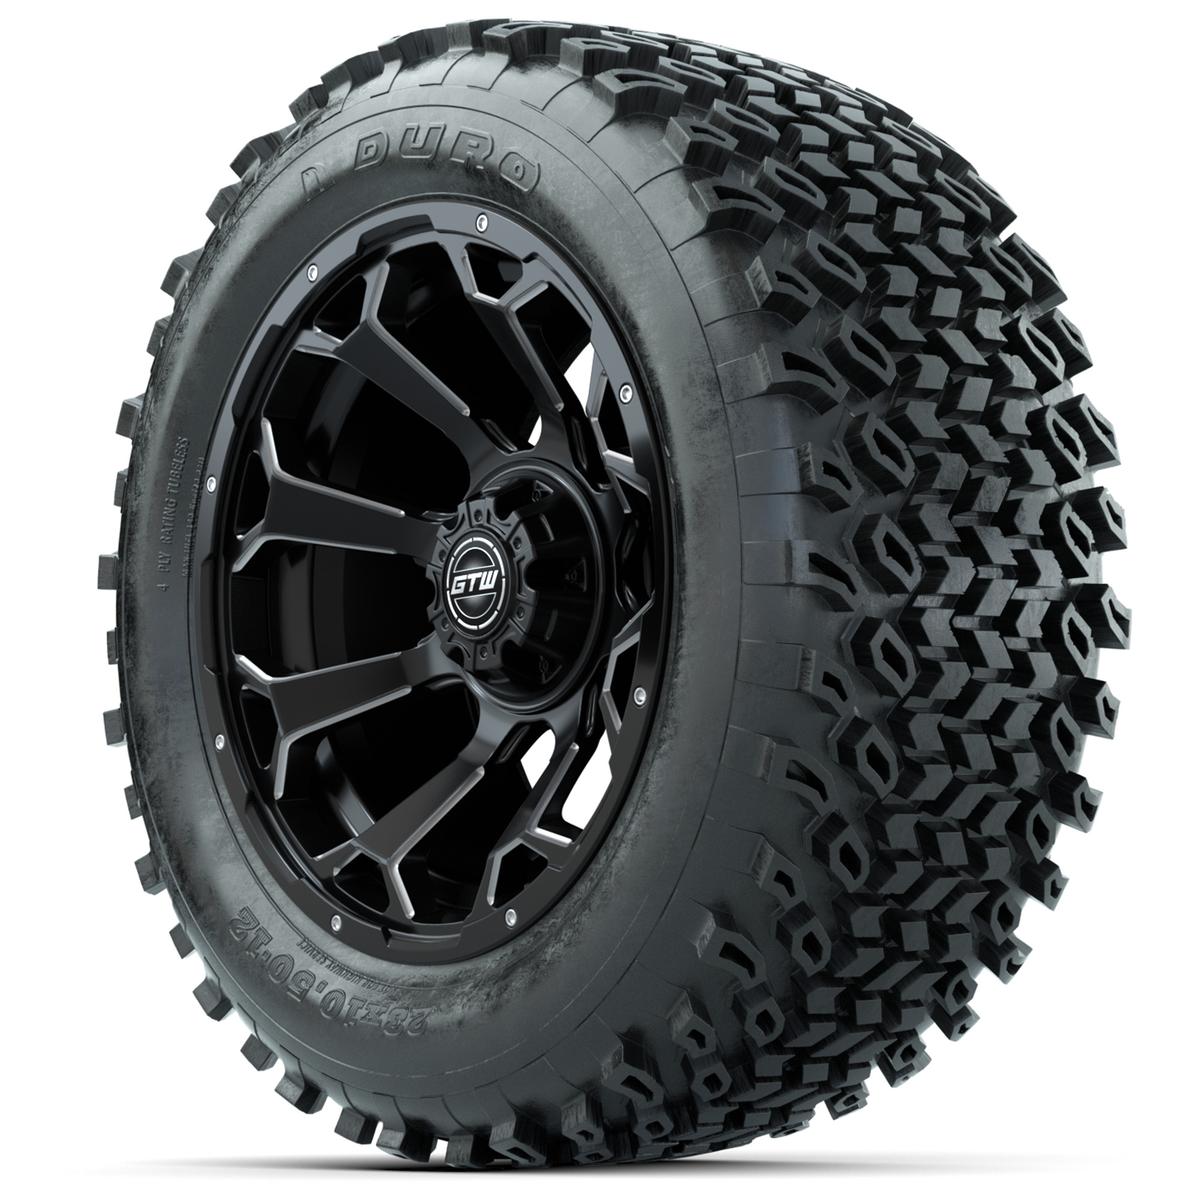 Set of (4) 14 in GTW Raven Wheels with 23x10-14 Duro Desert All-Terrain Tires